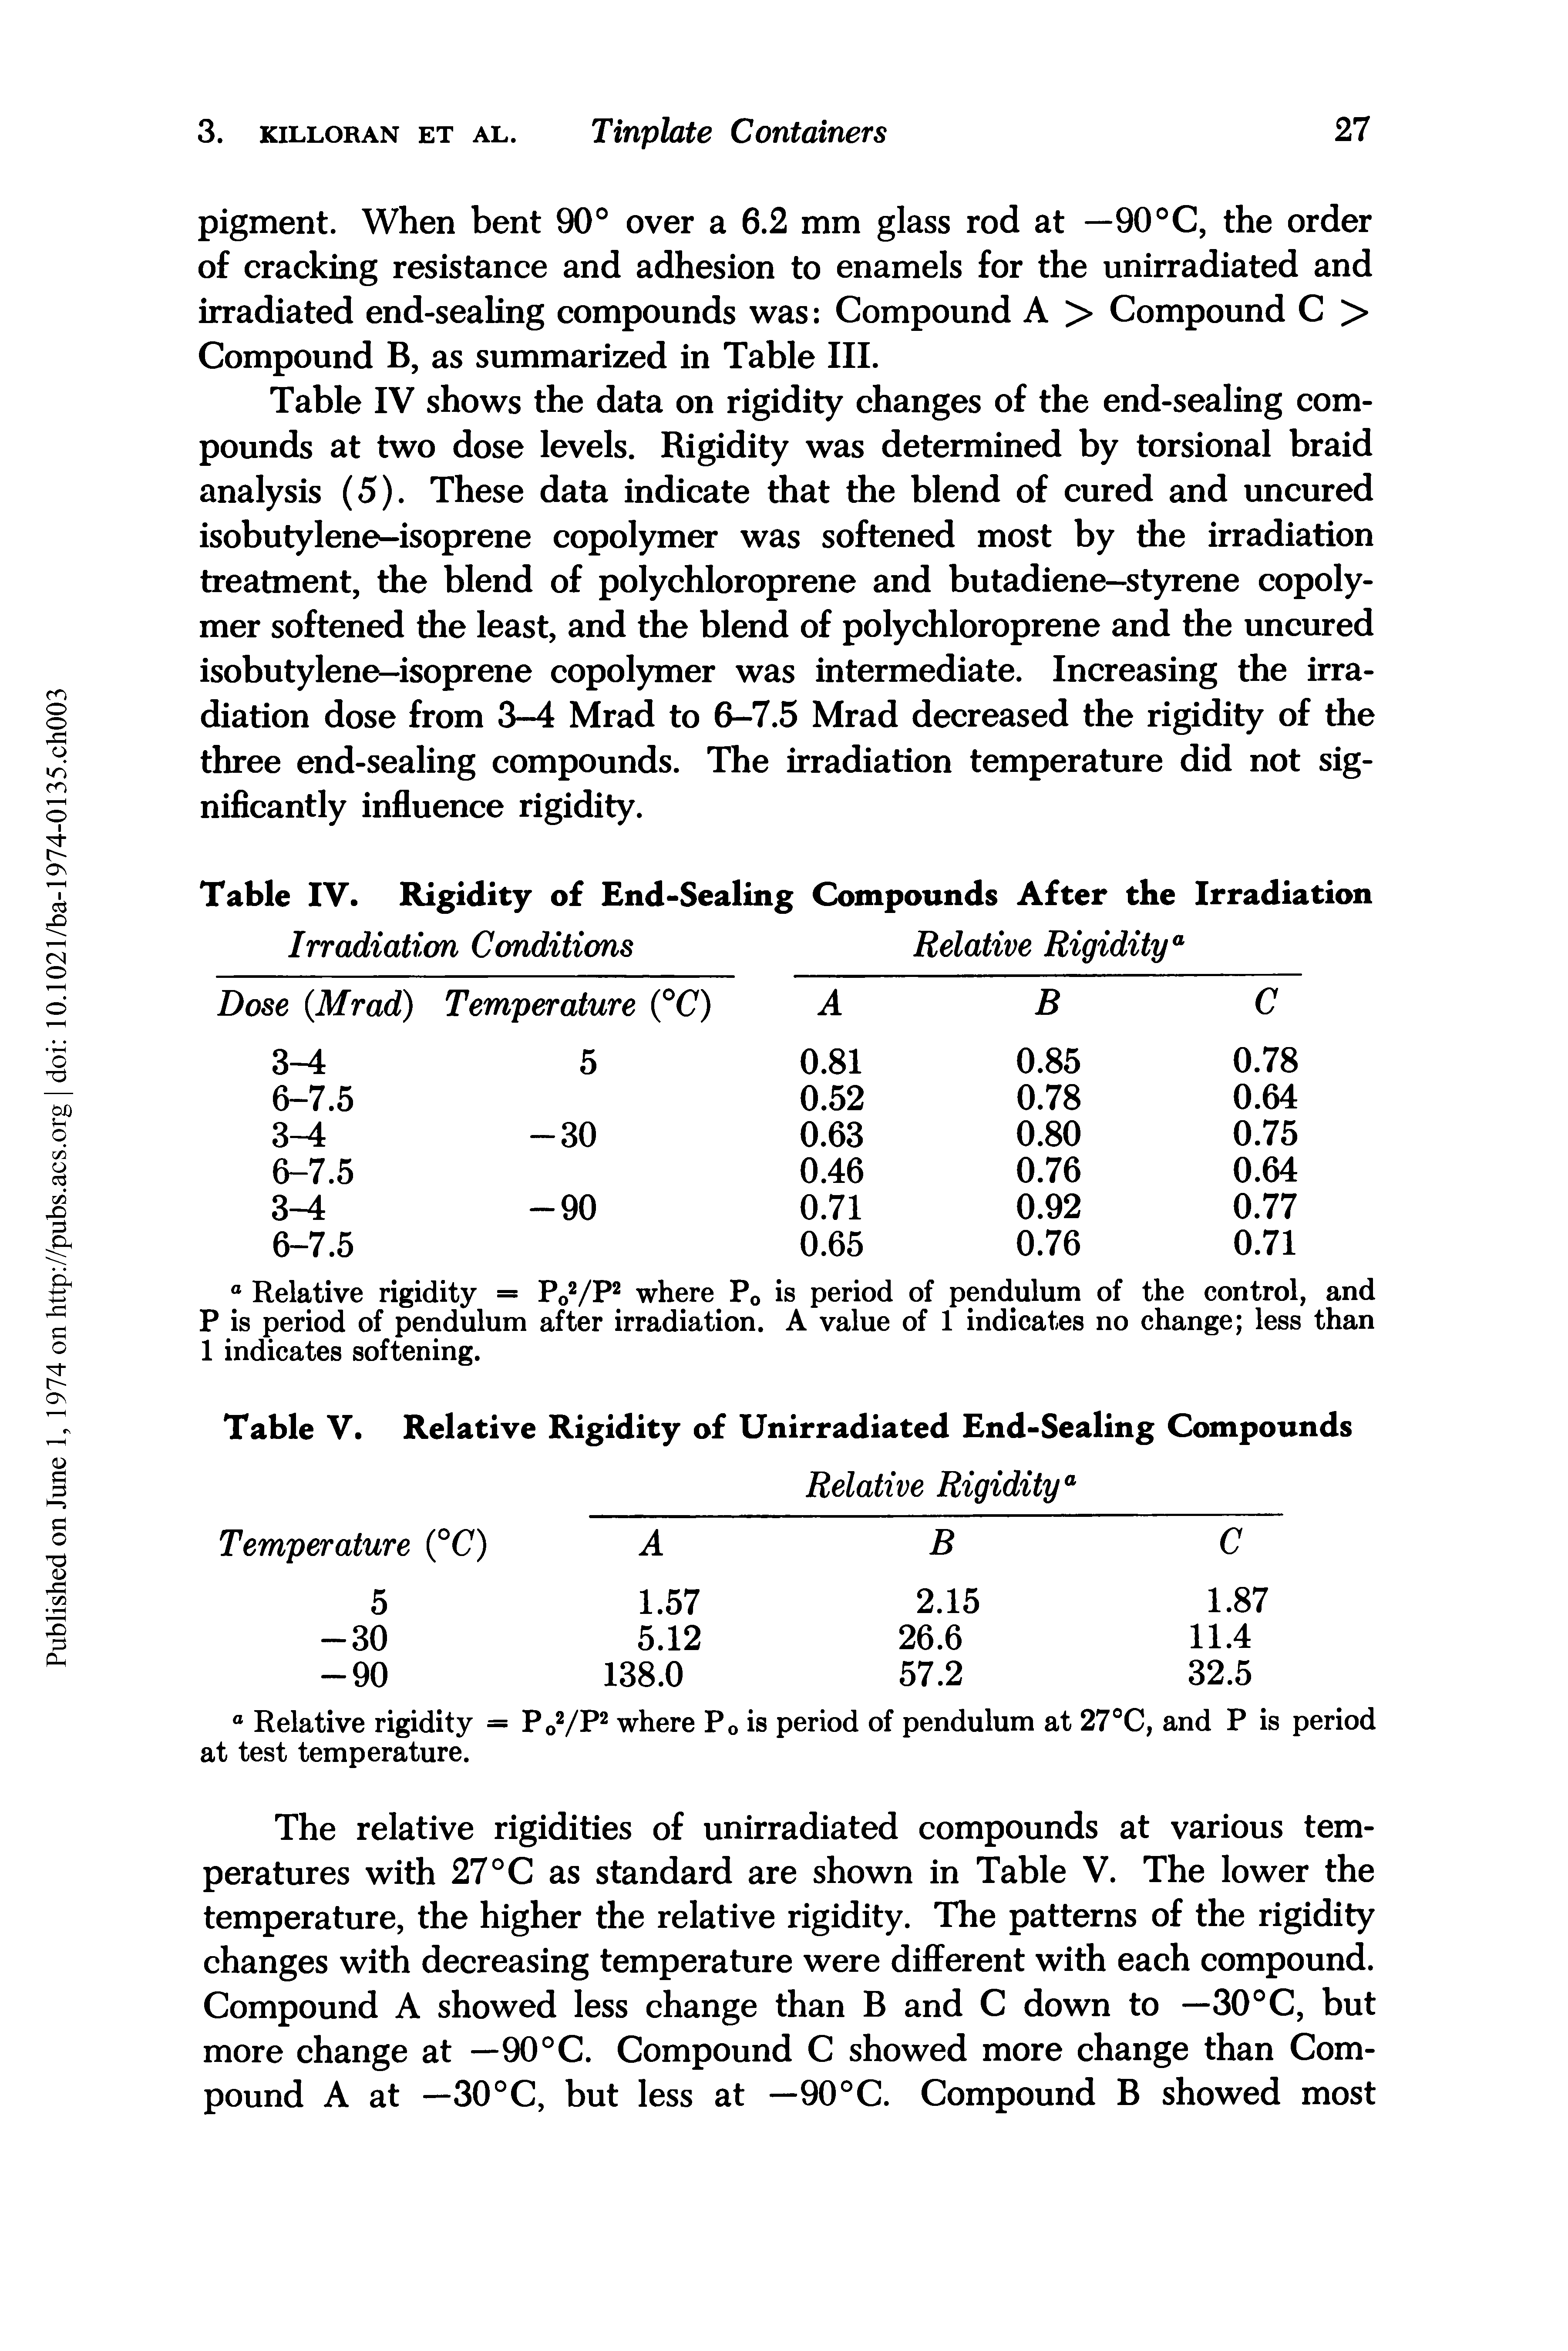 Table V. Relative Rigidity of Unirradiated End-Sealing Compounds...